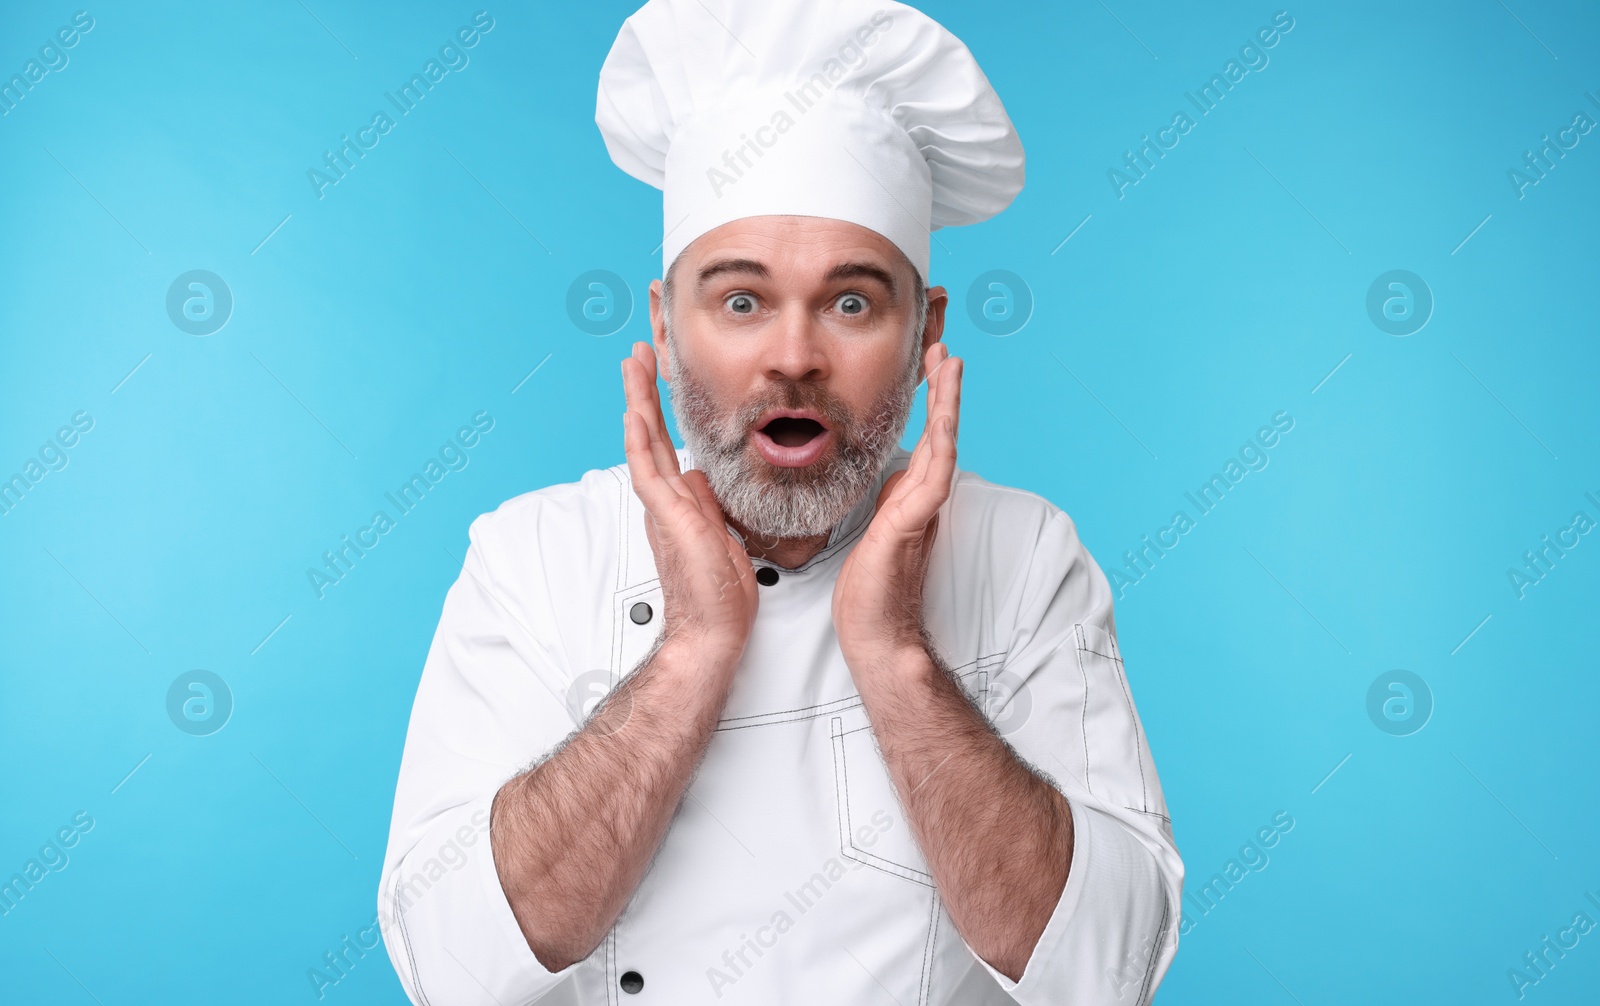 Photo of Surprised chef in uniform on light blue background